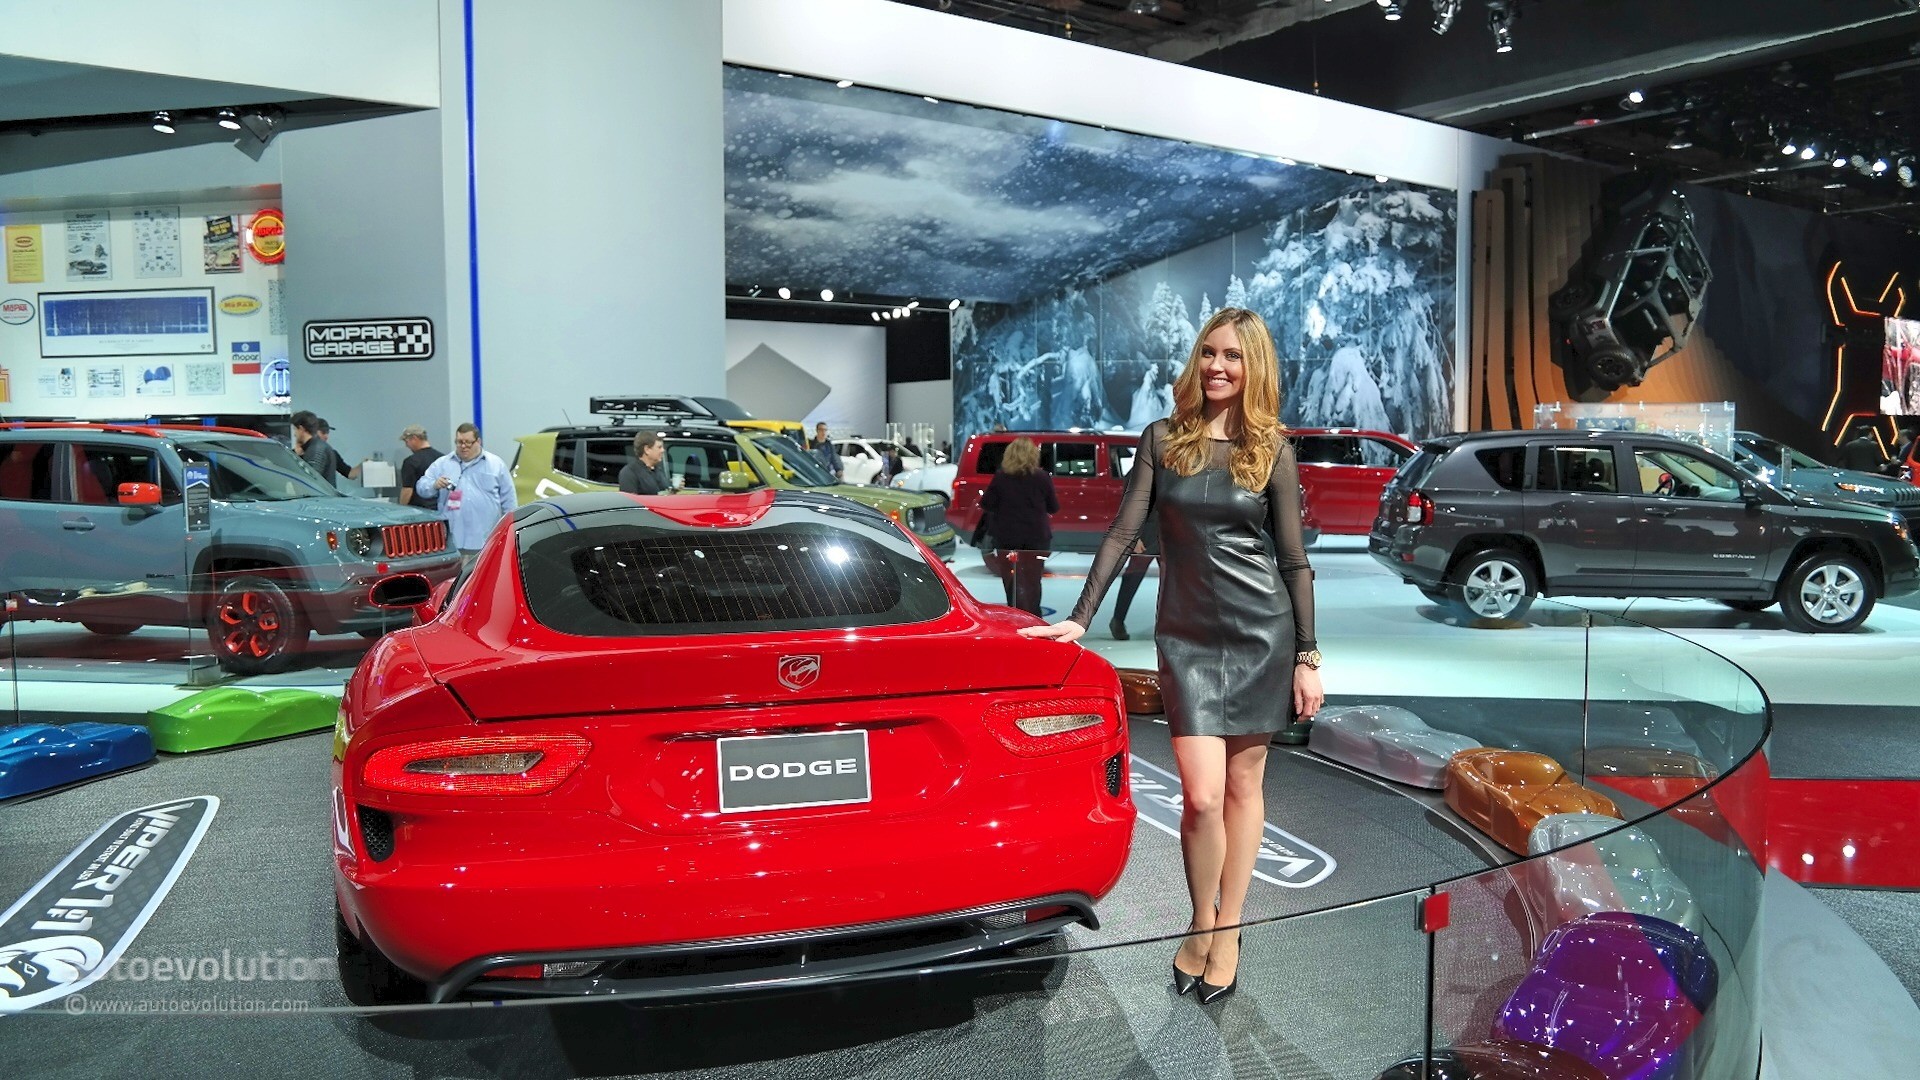 http://s1.cdn.autoevolution.com/images/news/gallery/girls-of-the-2015-detroit-auto-show-photo-gallery_7.jpg